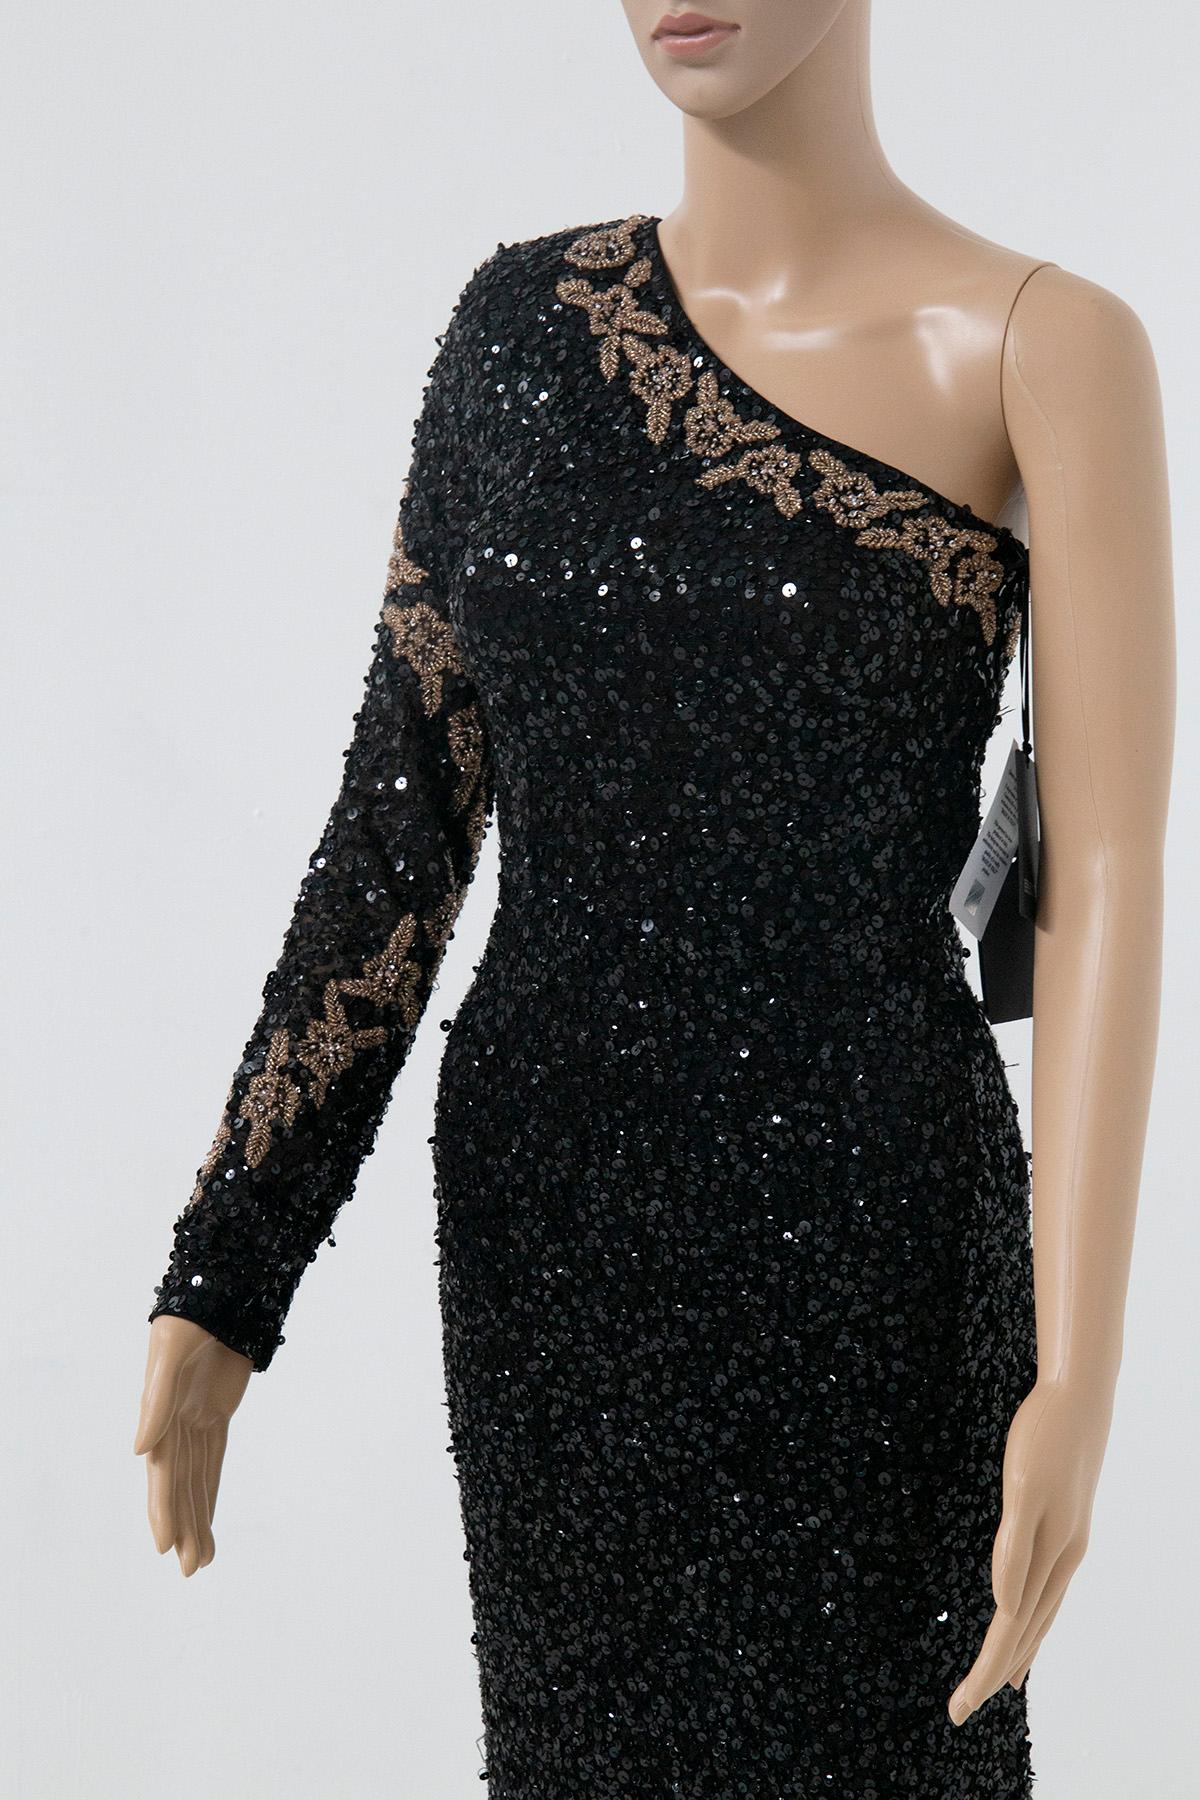 Women's Ermanno Scervino black and gold sequined evening dress For Sale